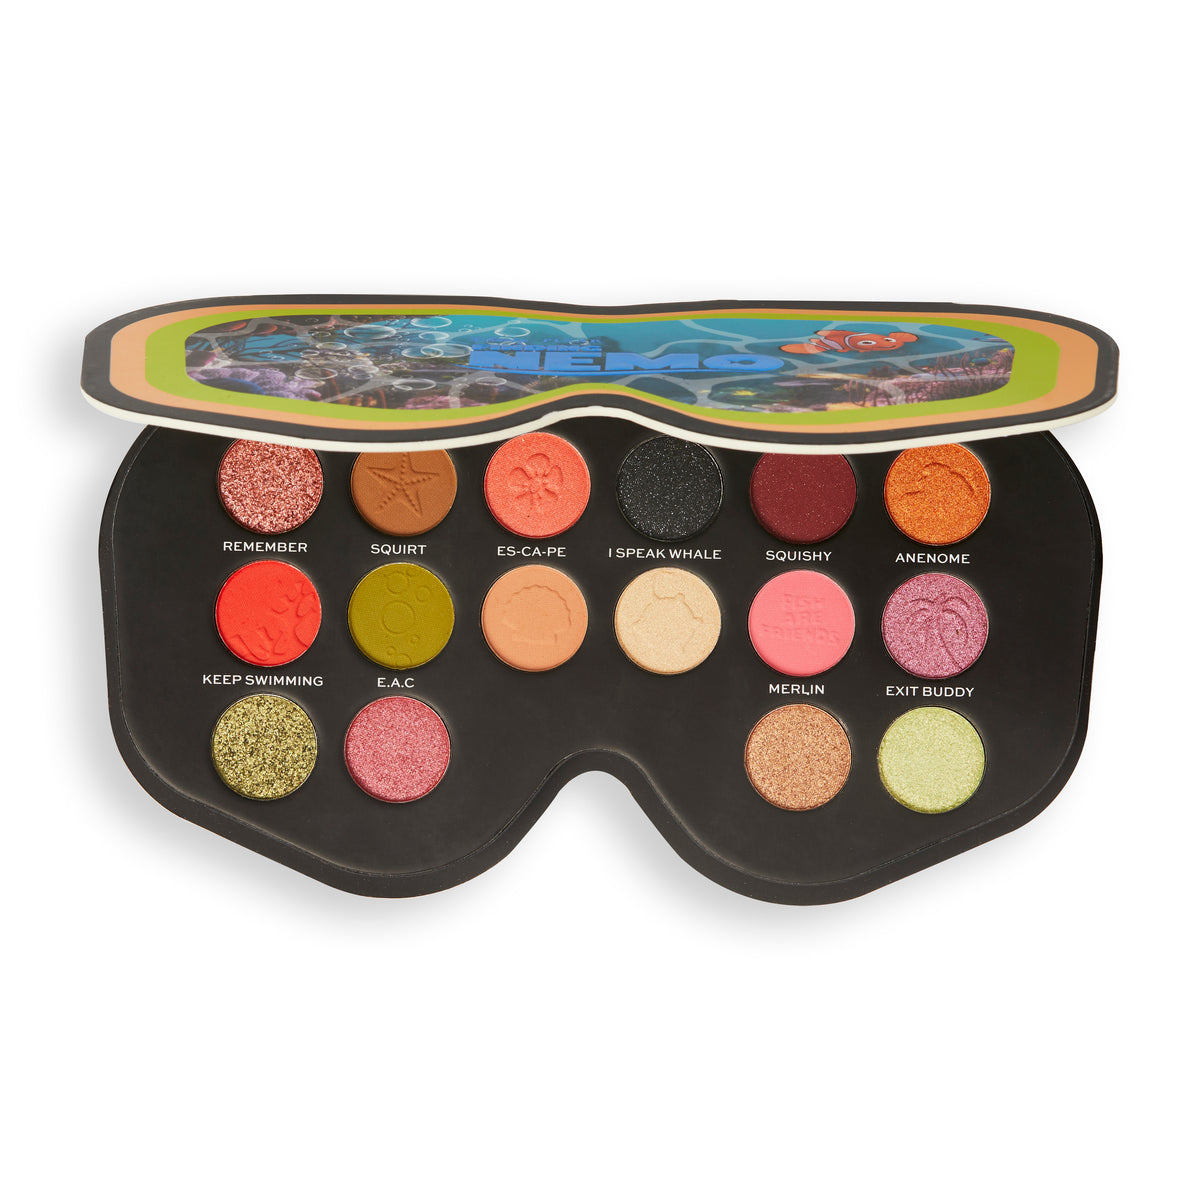 DISNEY & PIXAR’S FINDING NEMO AND REVOLUTION P. SHERMAN SHADOW PALETTE OUTLET